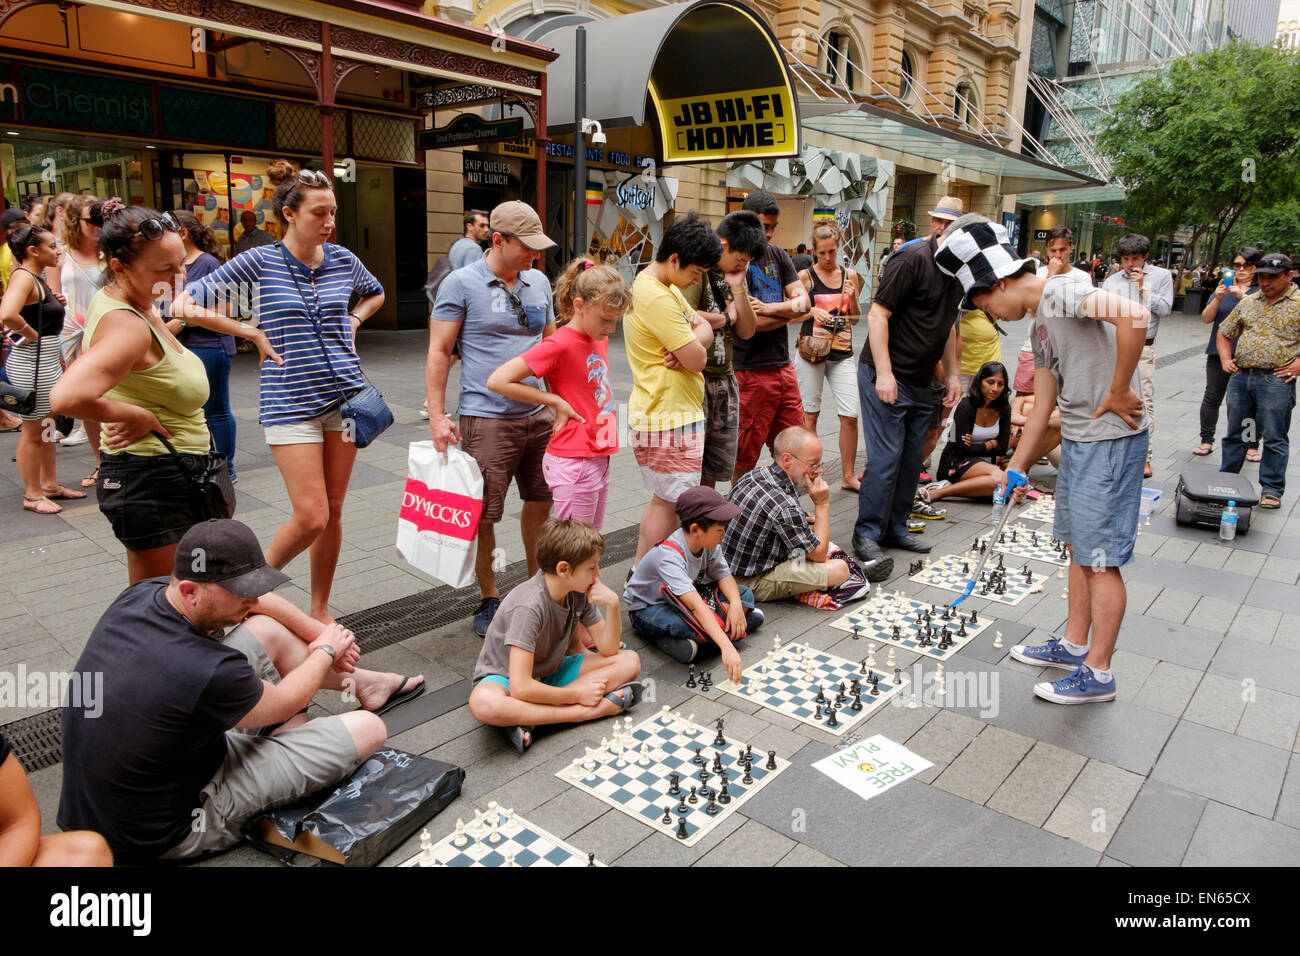 Young man in a pedestrianised street playing simultaneous chess  with several people, while others watch. Outdoor board game; outdoors; audience Stock Photo